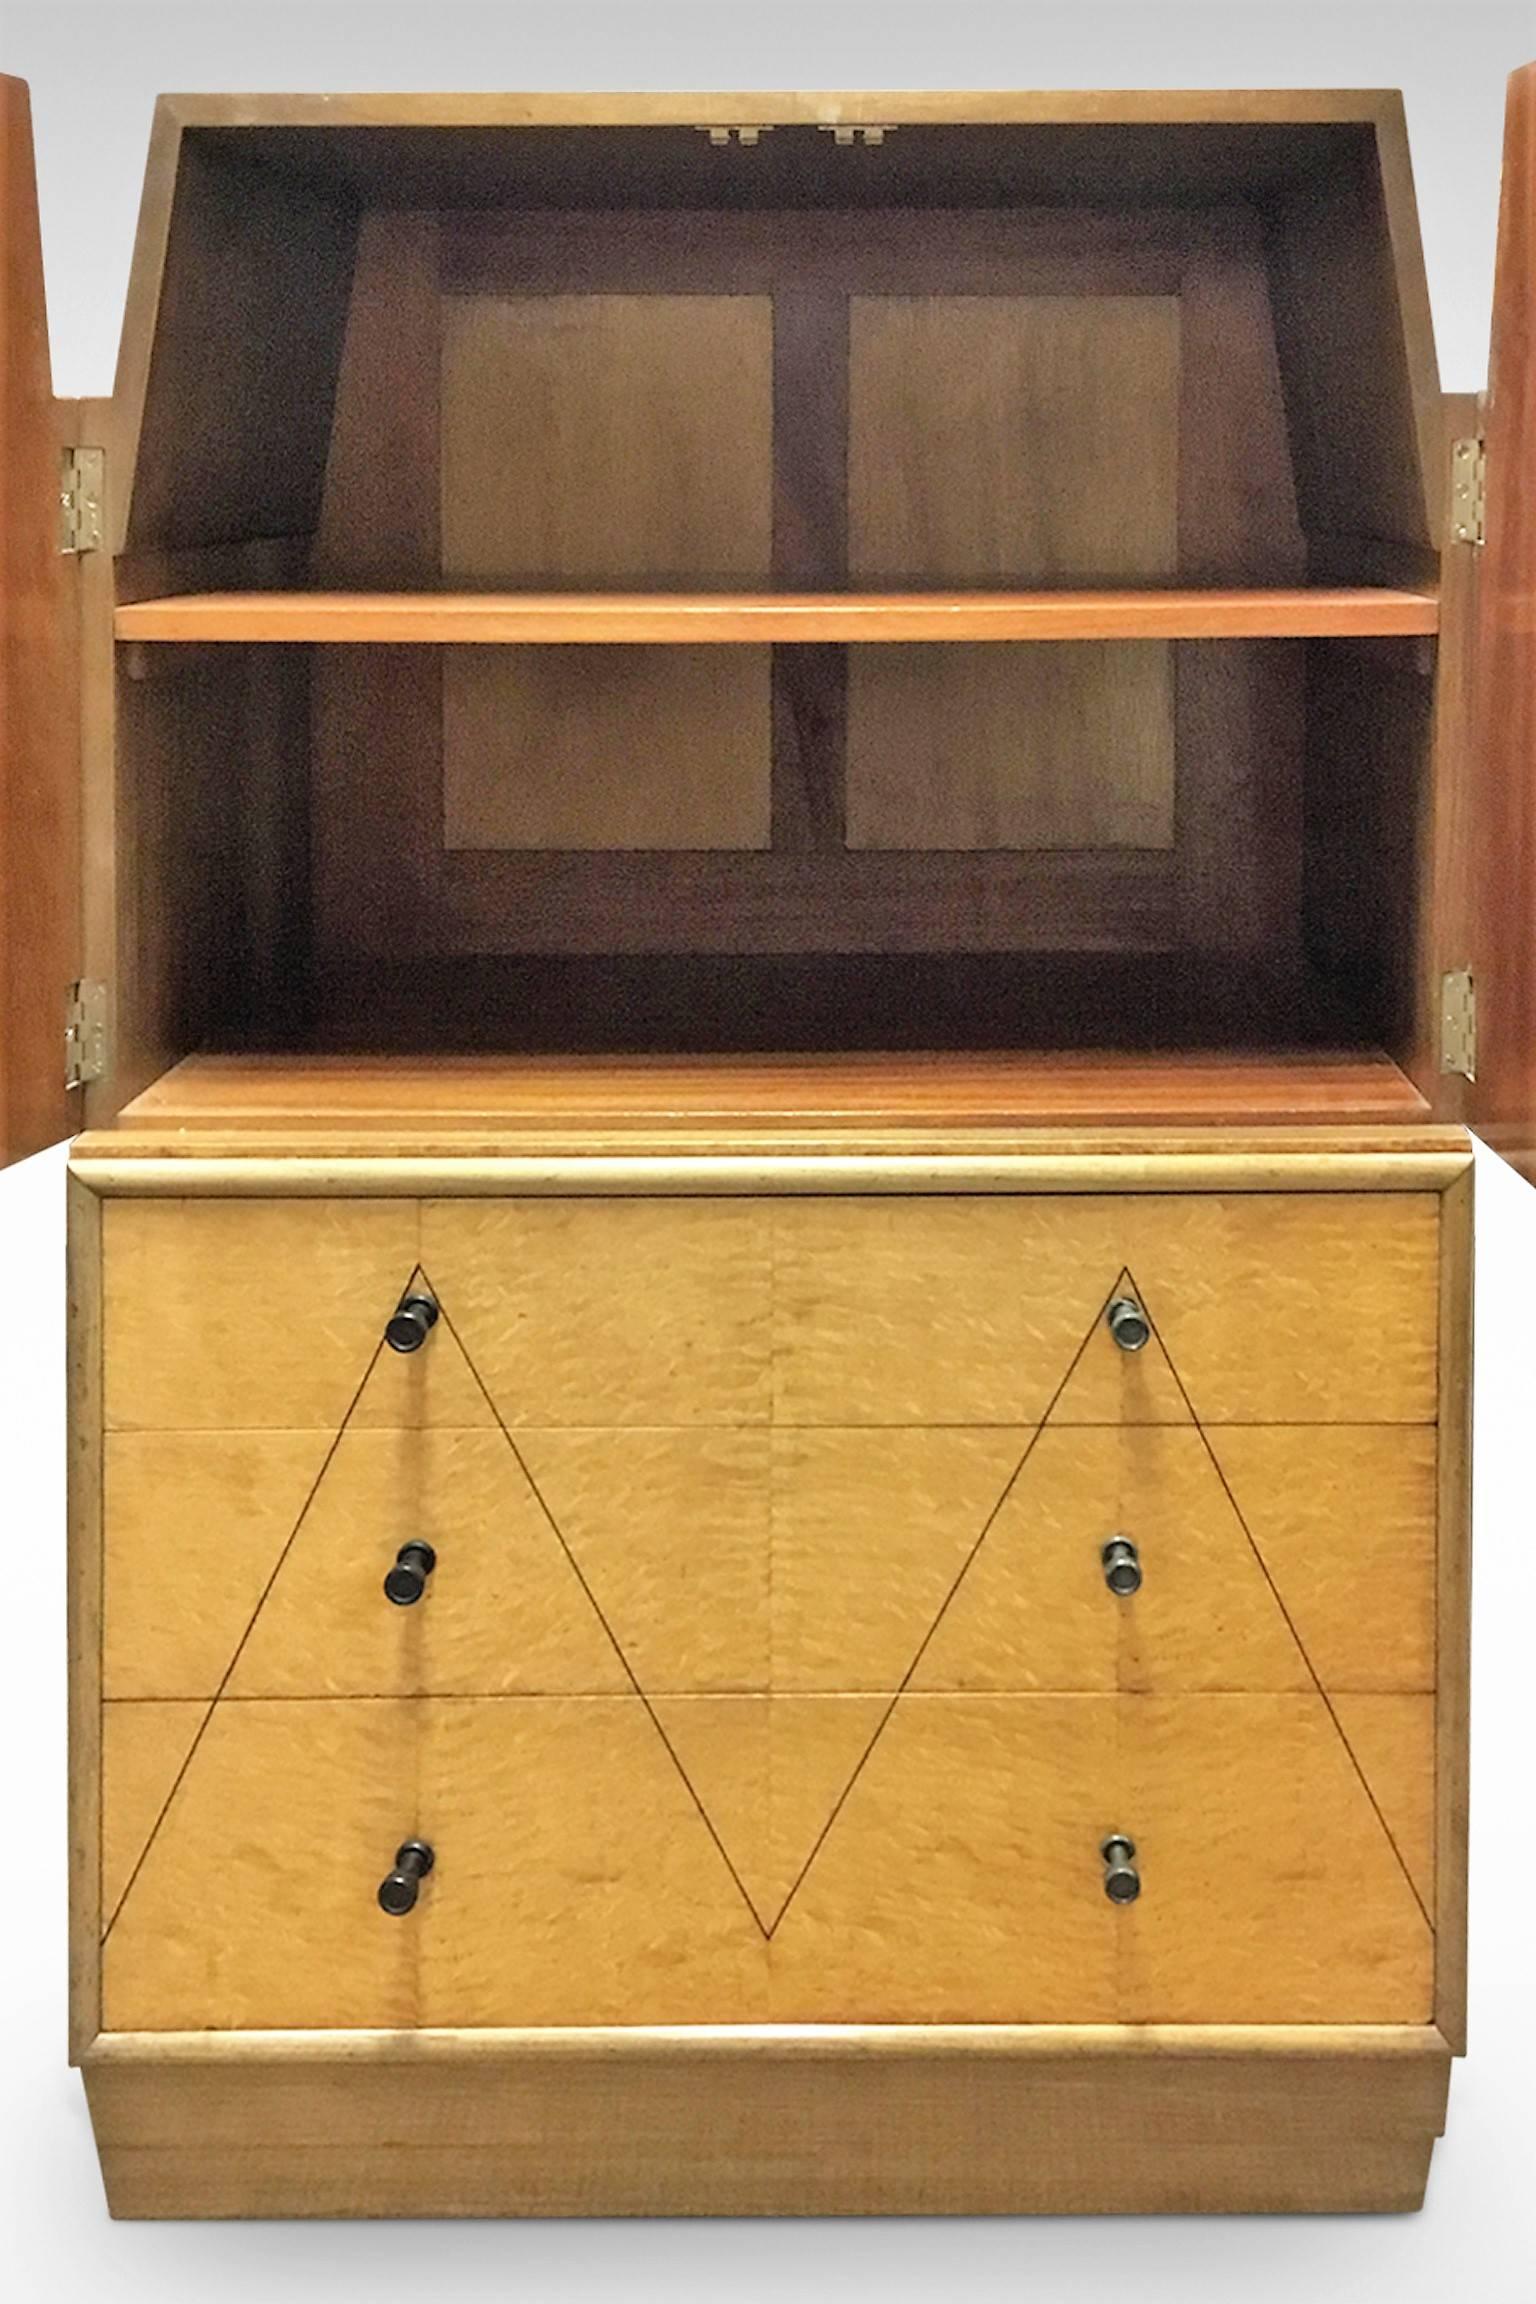 A stunning and original Art Deco cabinet in the skyscraper style with a chiseled stepped outline to the cupboard sides and plinth.
It offers three drawers with a cupboard over in Hungarian Ash veneers. The top and sides are in walnut,
circa